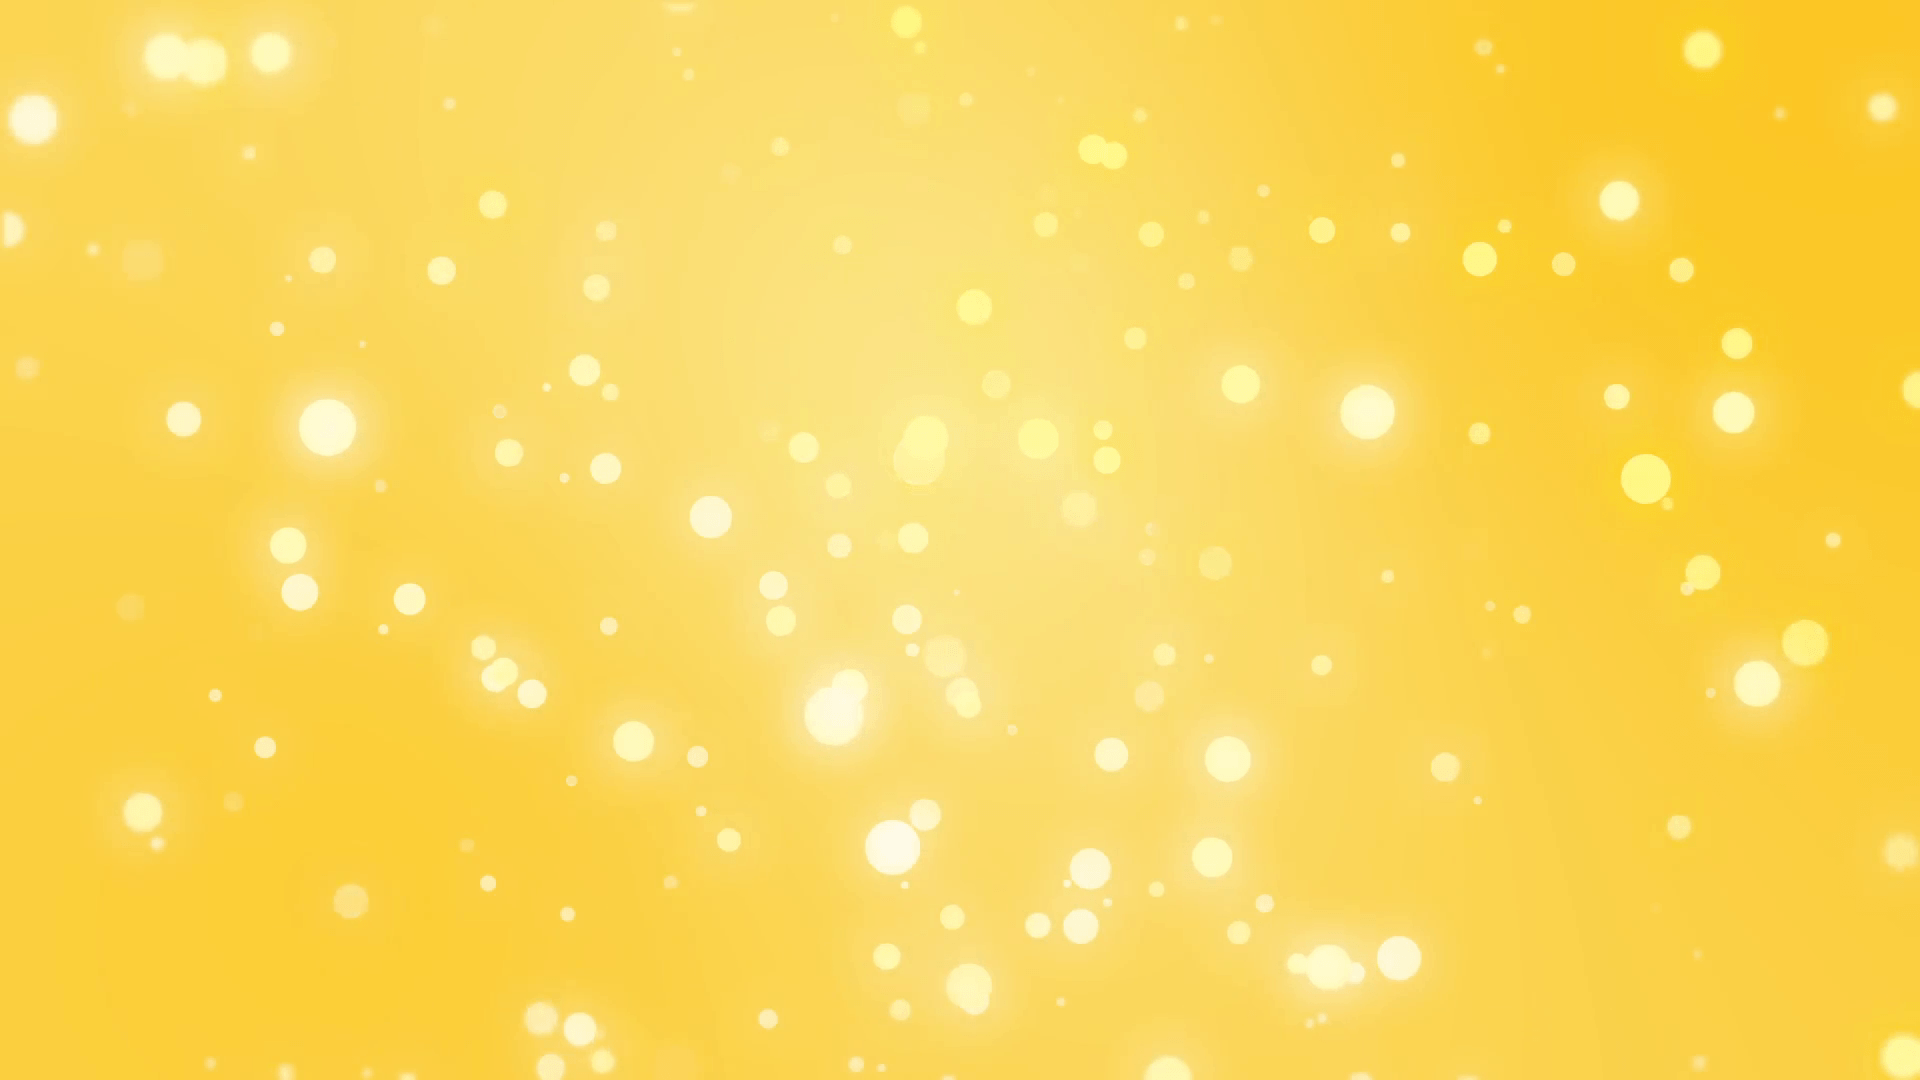 Sparkly light particles moving across a gold yellow gradient